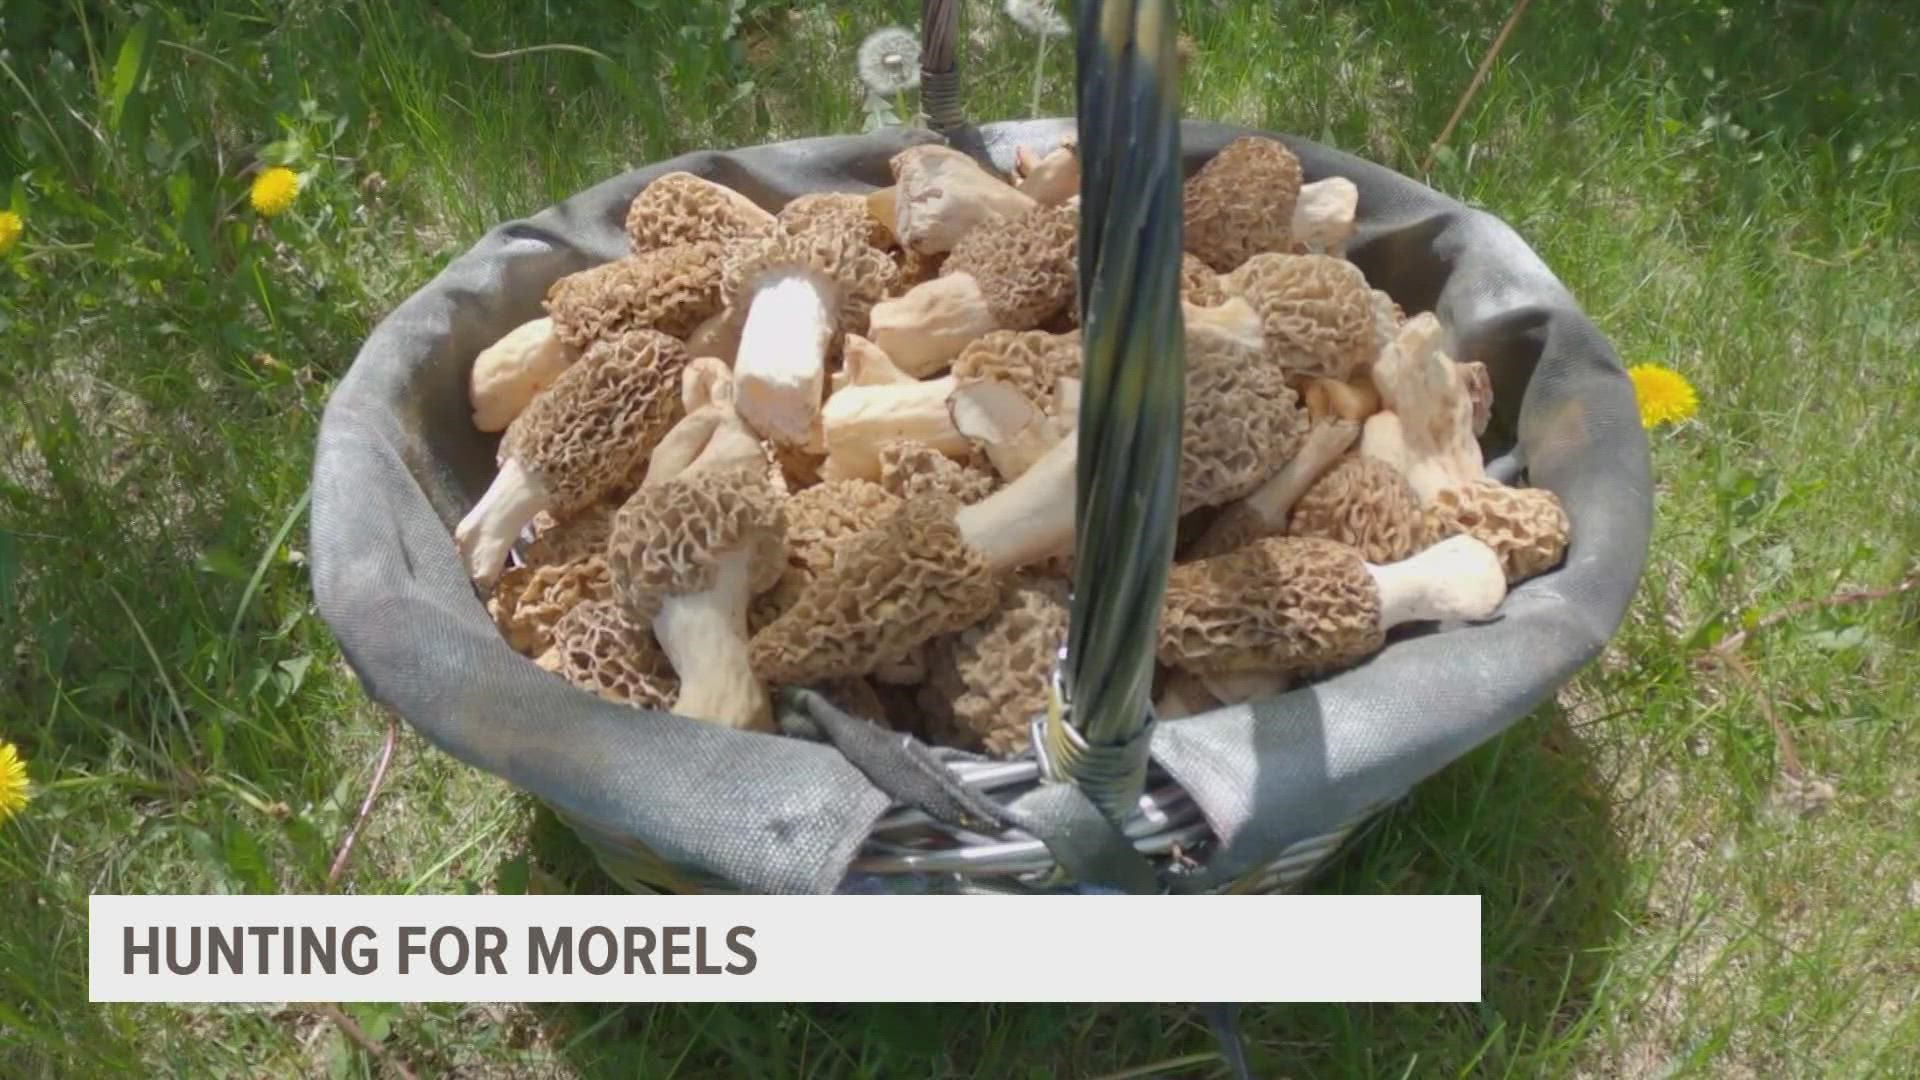 Todd Whitman's first morel hunt was at 3 years old, in Wright County.